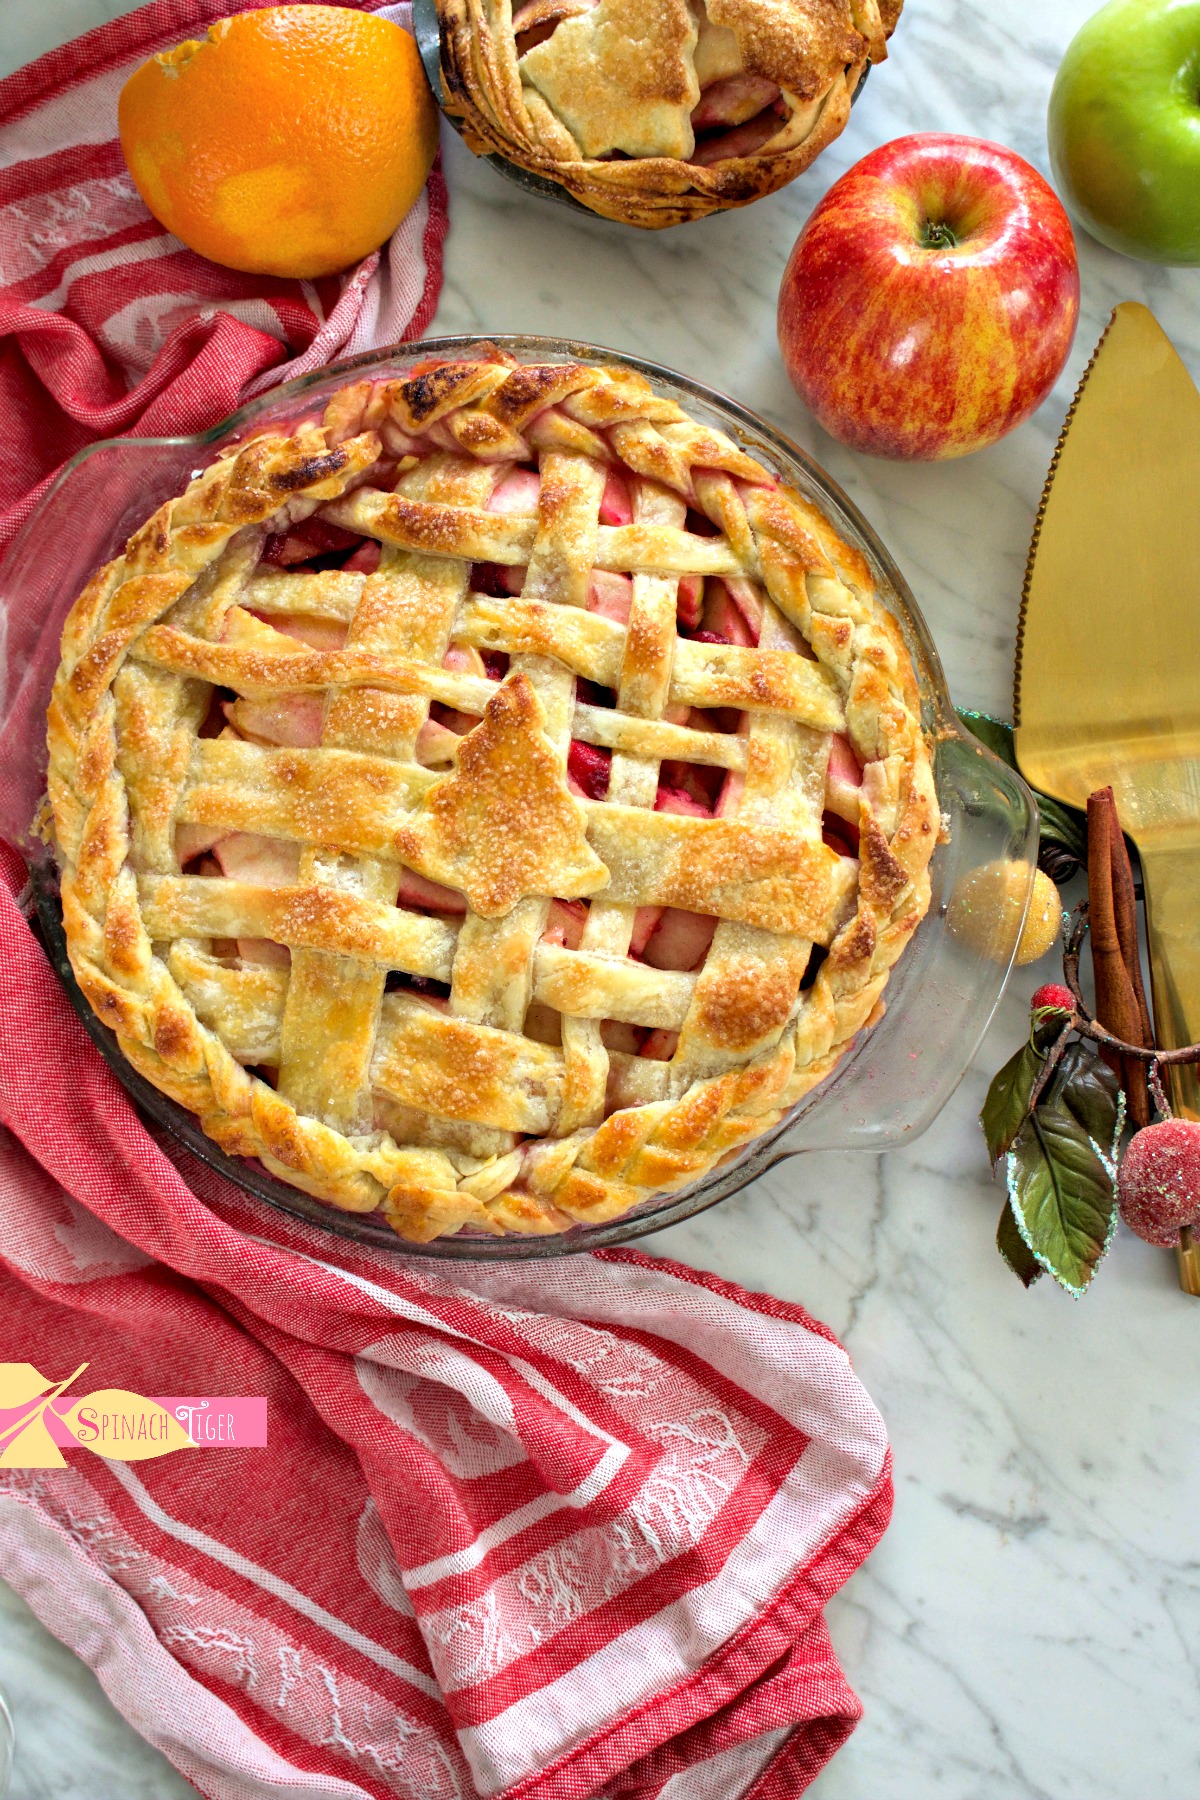 Christmas Apple Pie with decorative pie crust from Spinach Tiger